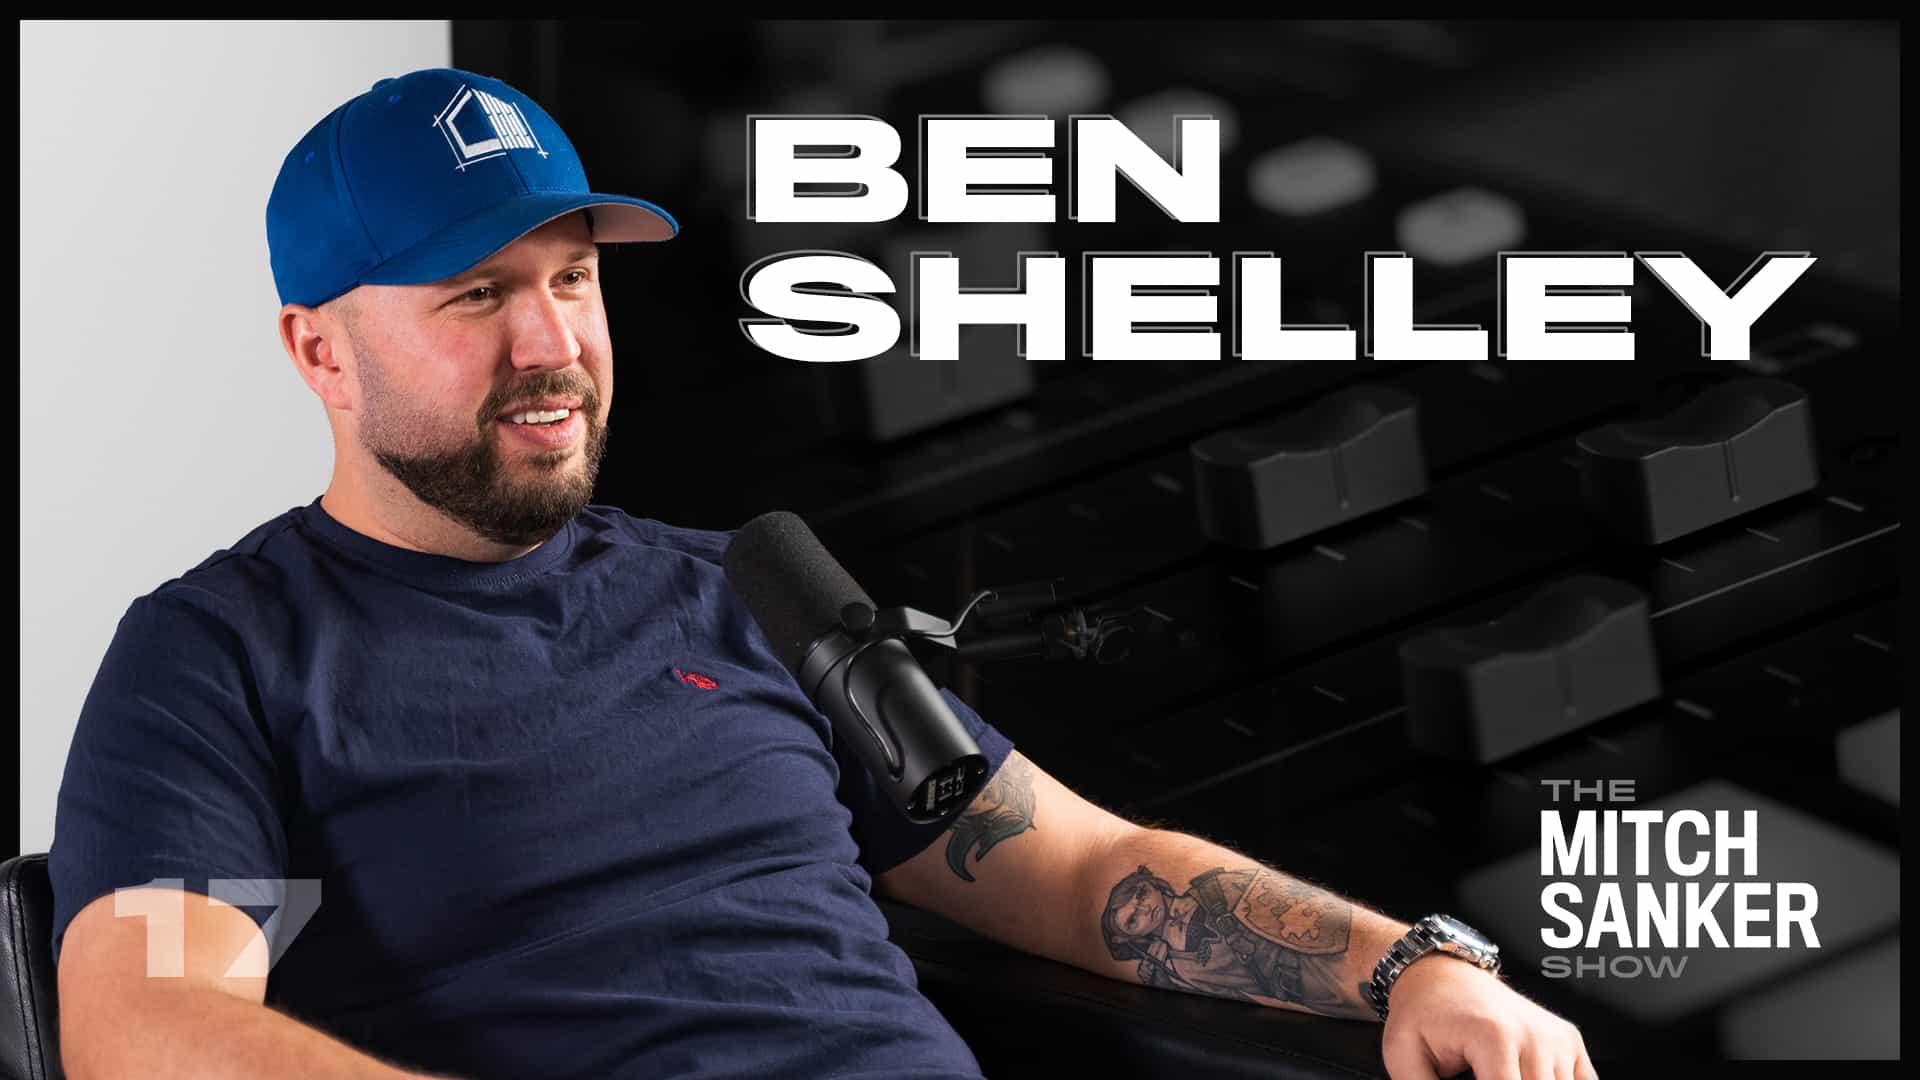 You are currently viewing The Mitch Sanker Show – Episode 17 featuring Ben Shelley